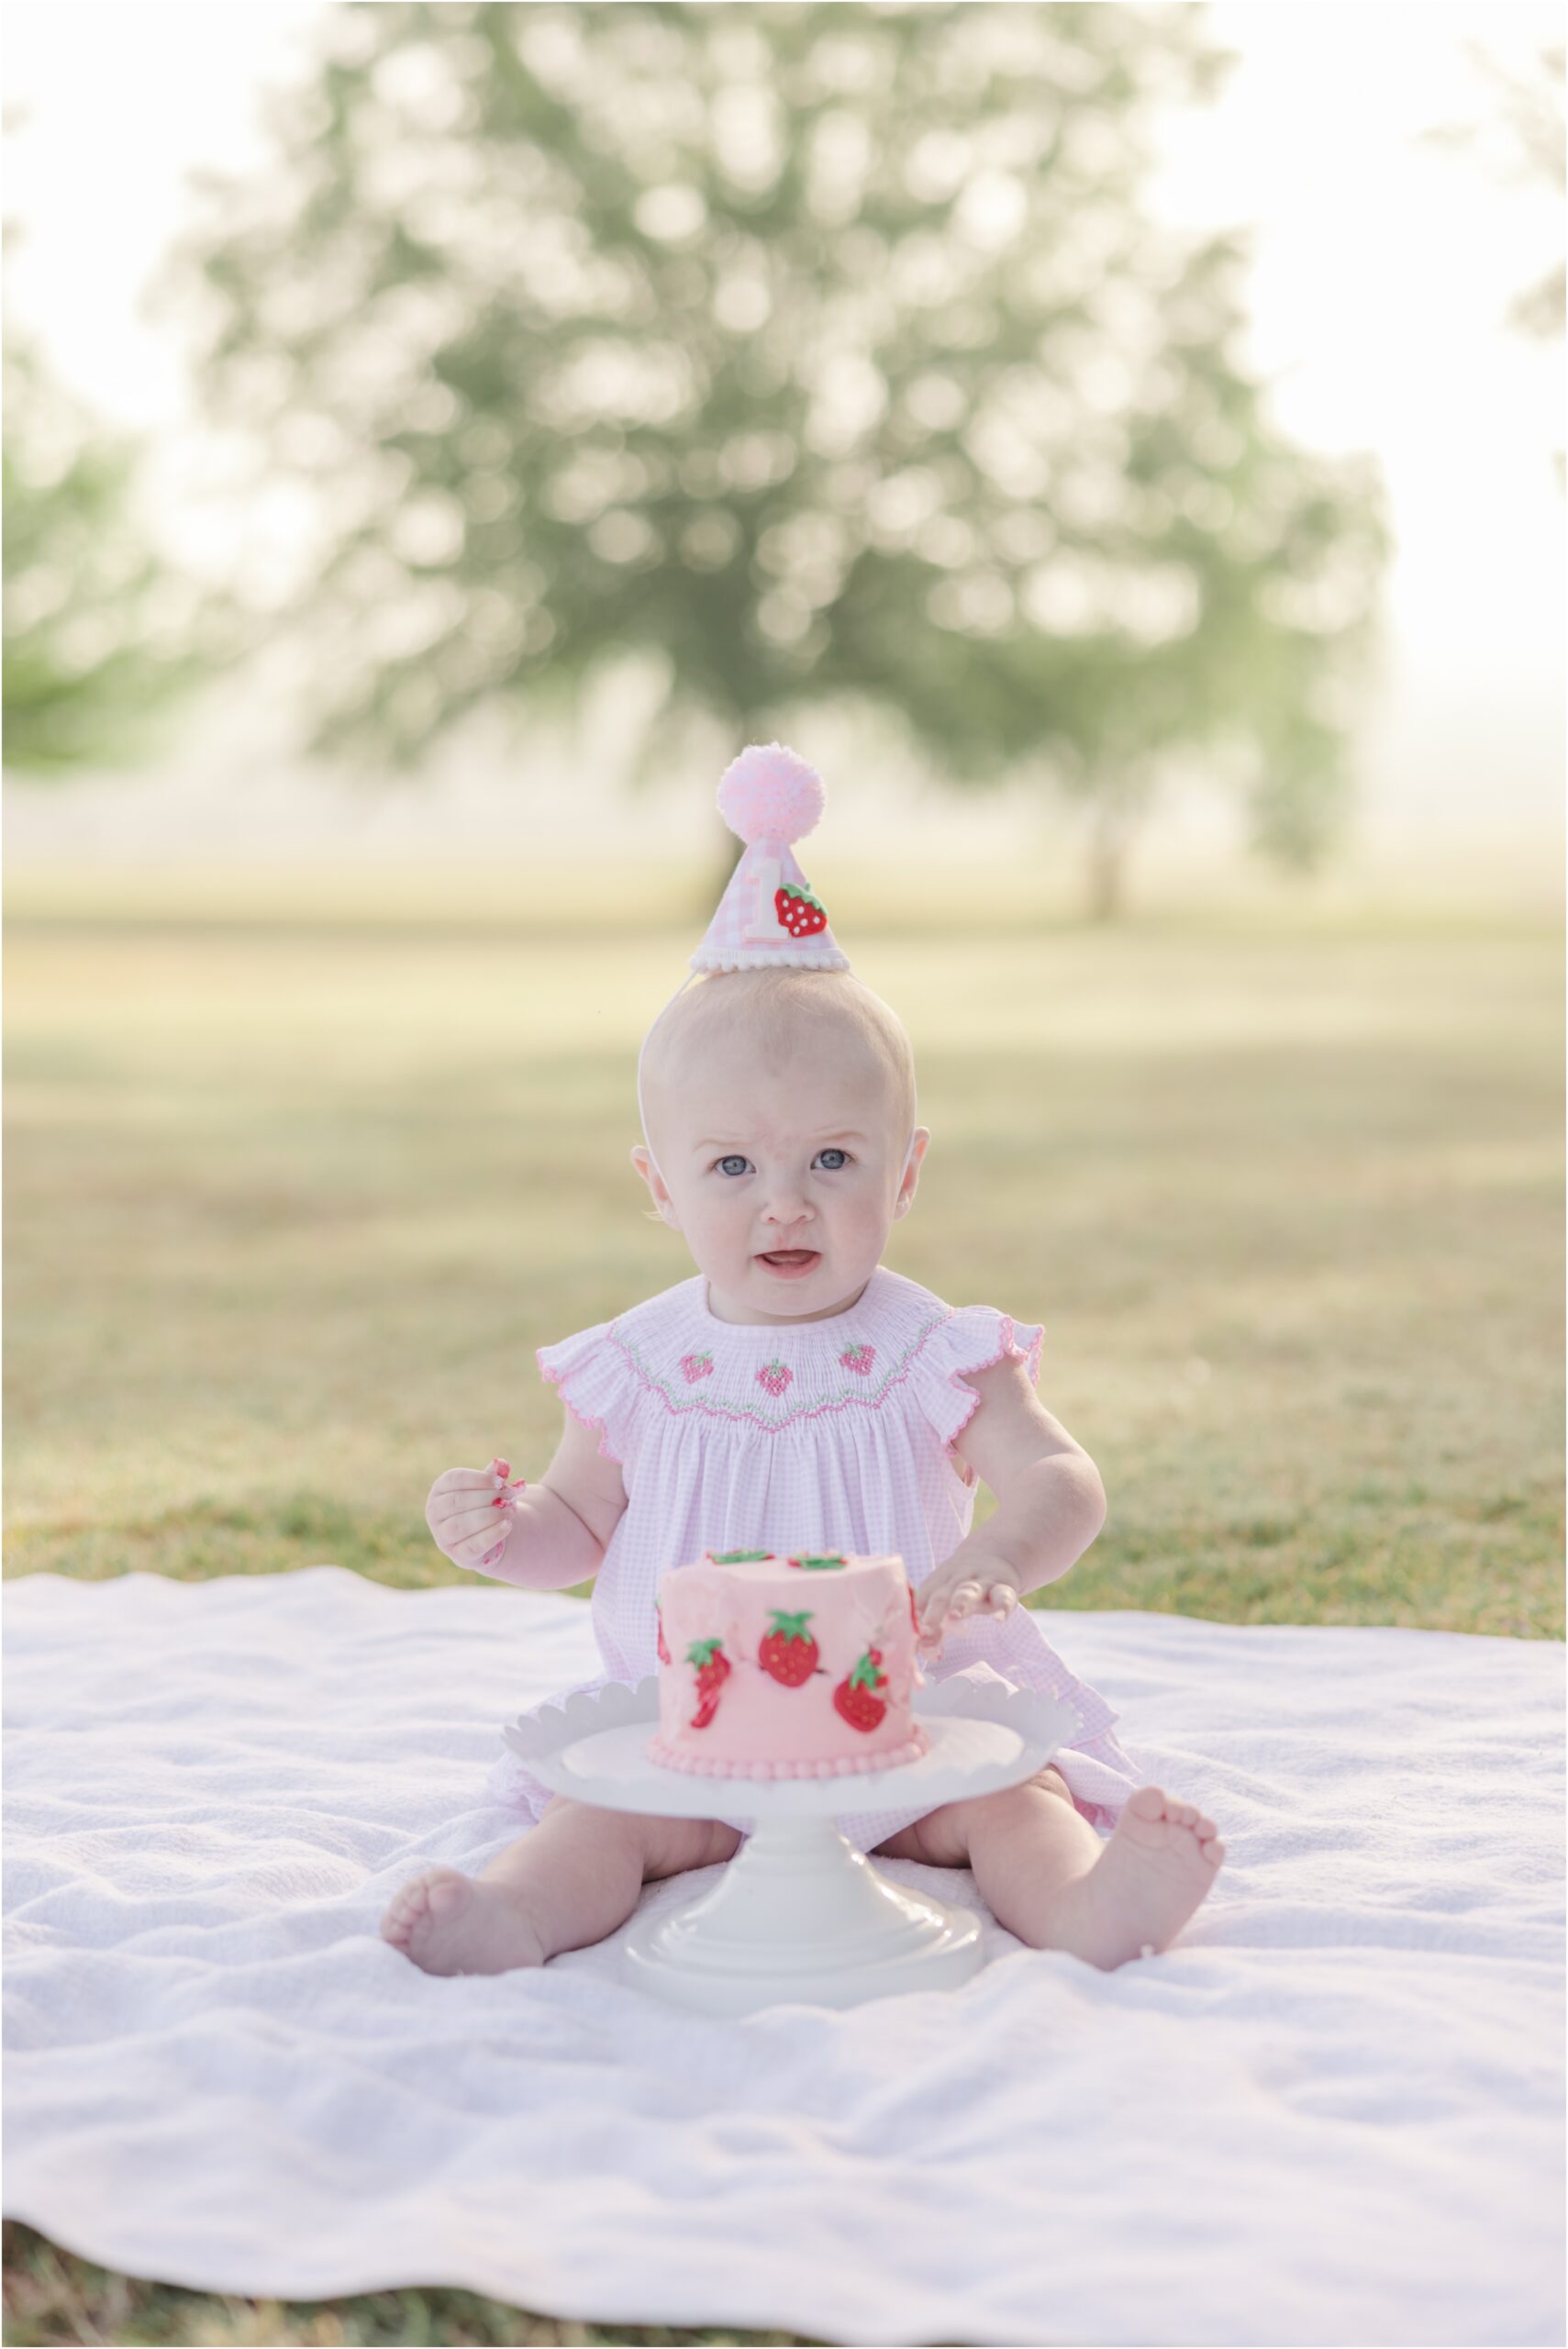 First birthday portraits of a baby girl with a strawberry smash cake, strawberry bubble, and birthday hat with a one and strawberry on it.